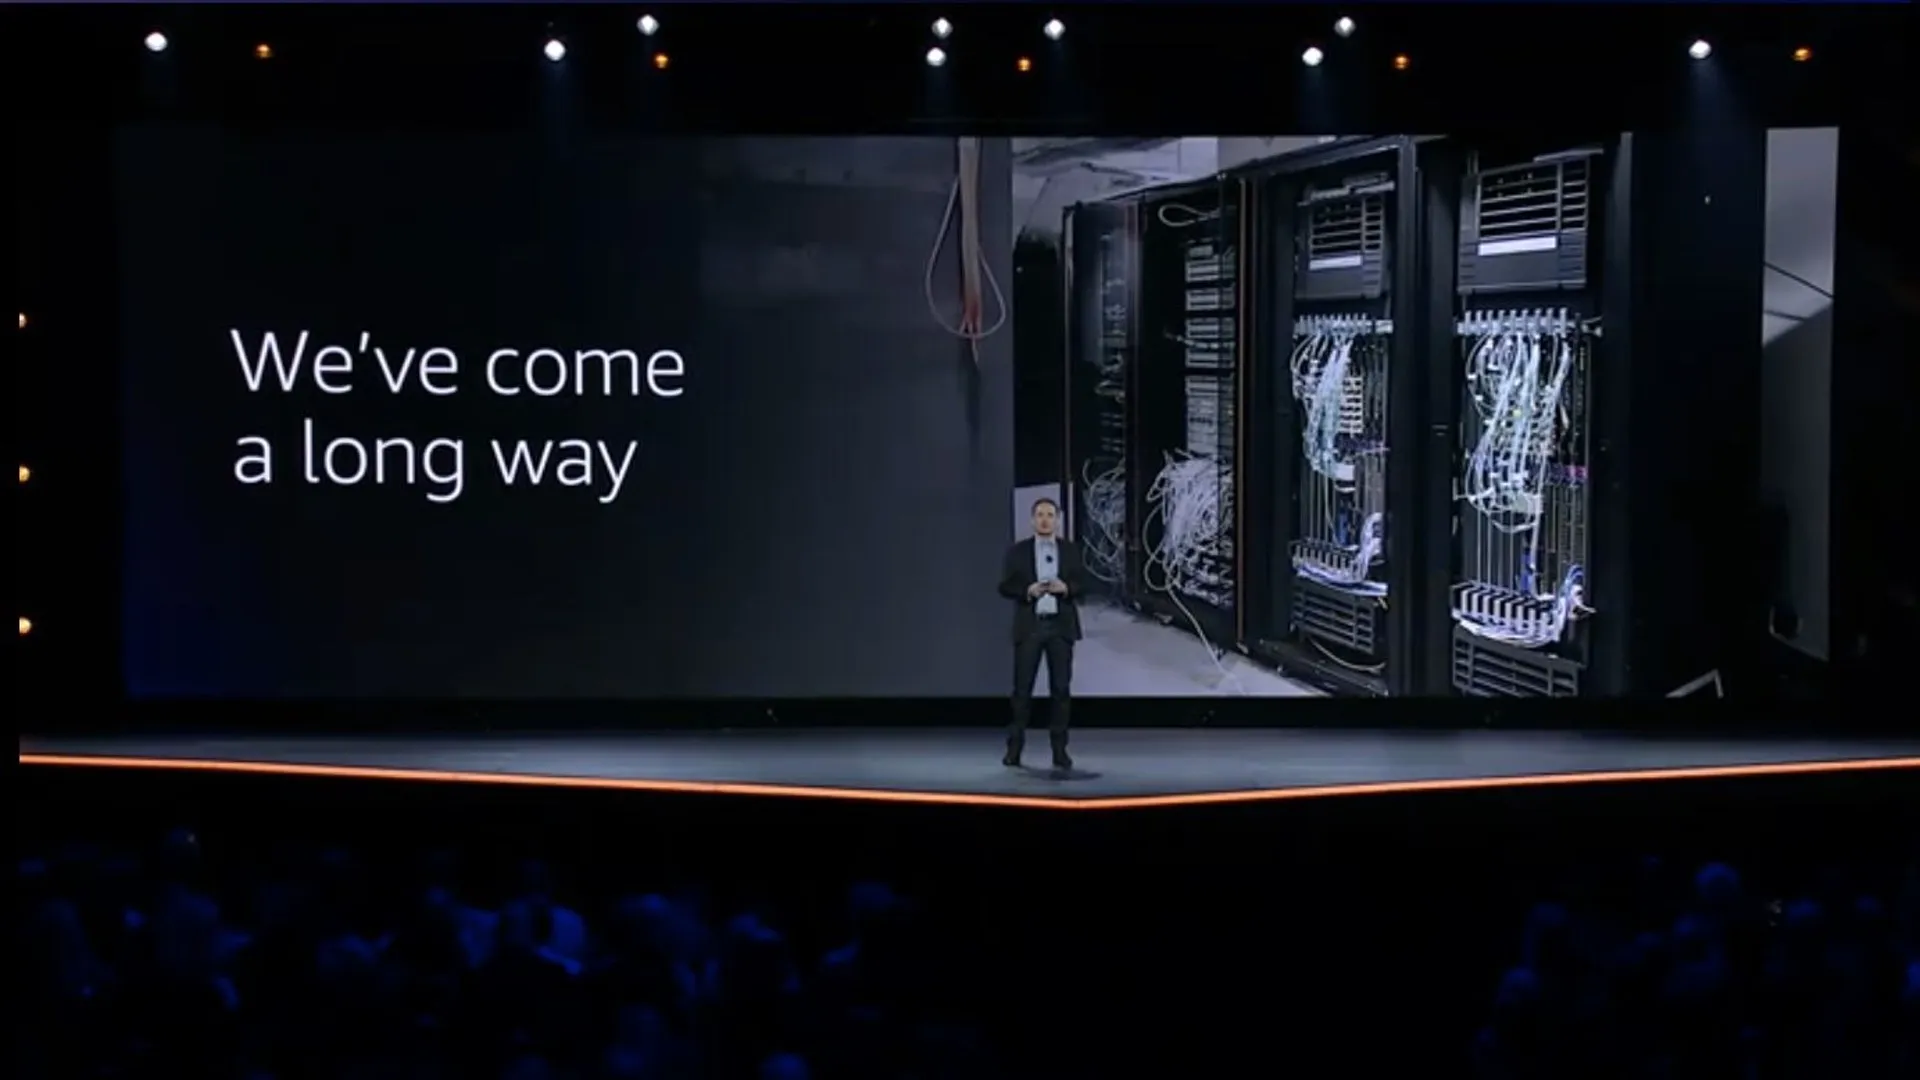 Adam Selipsky's Keynote at AWS re:Invent 2021